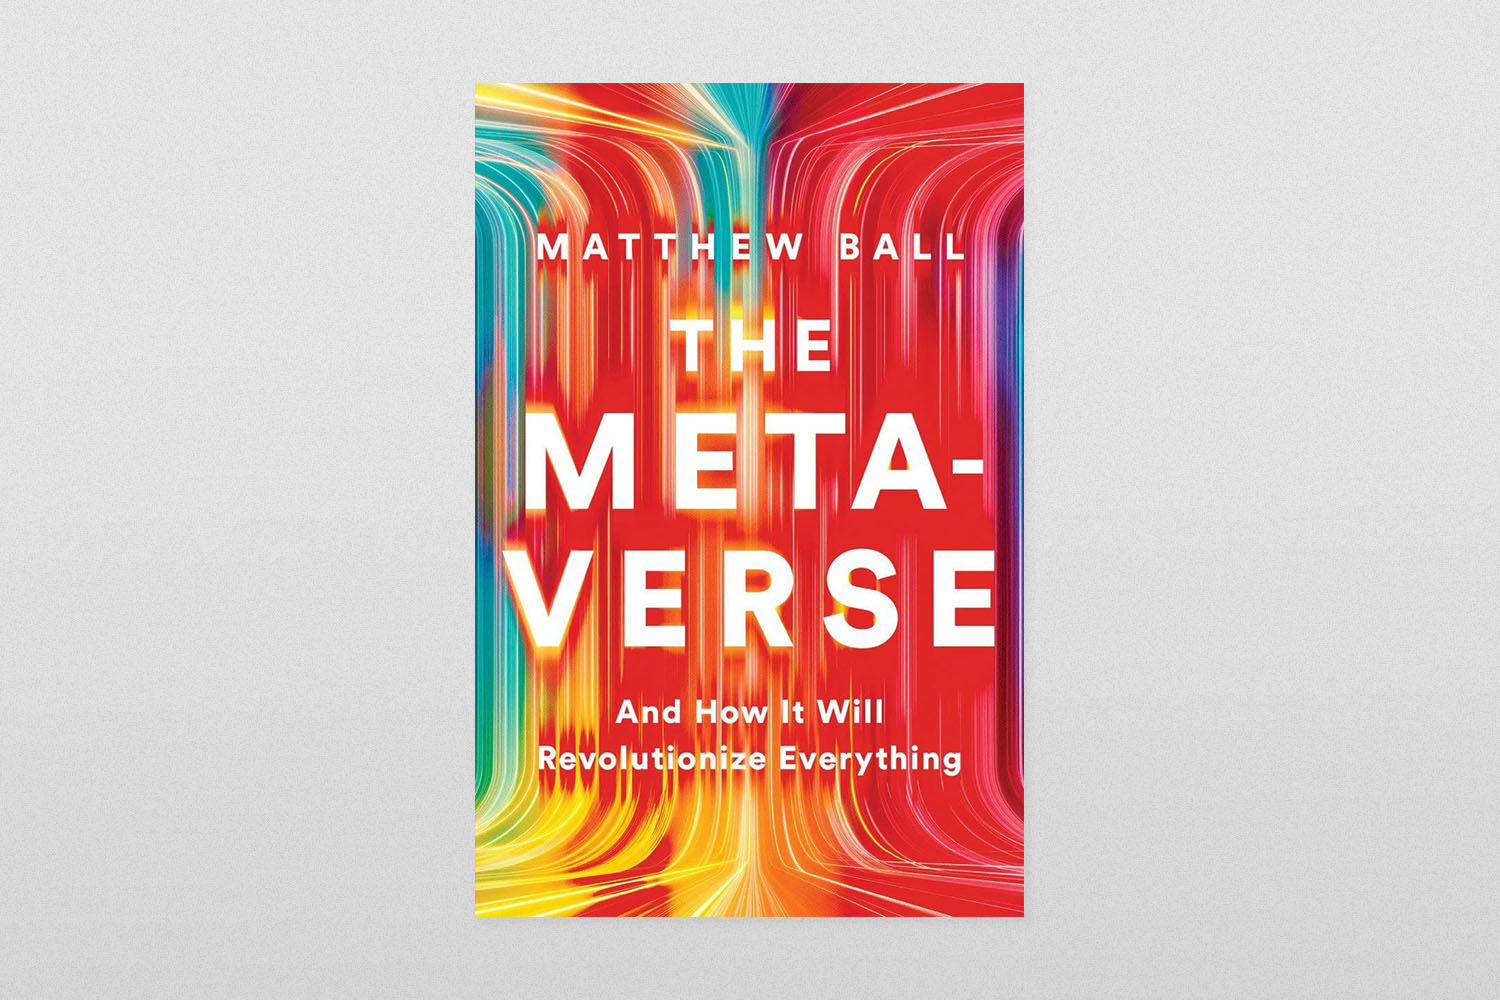 The Metaverse- And How It Will Revolutionize Everything